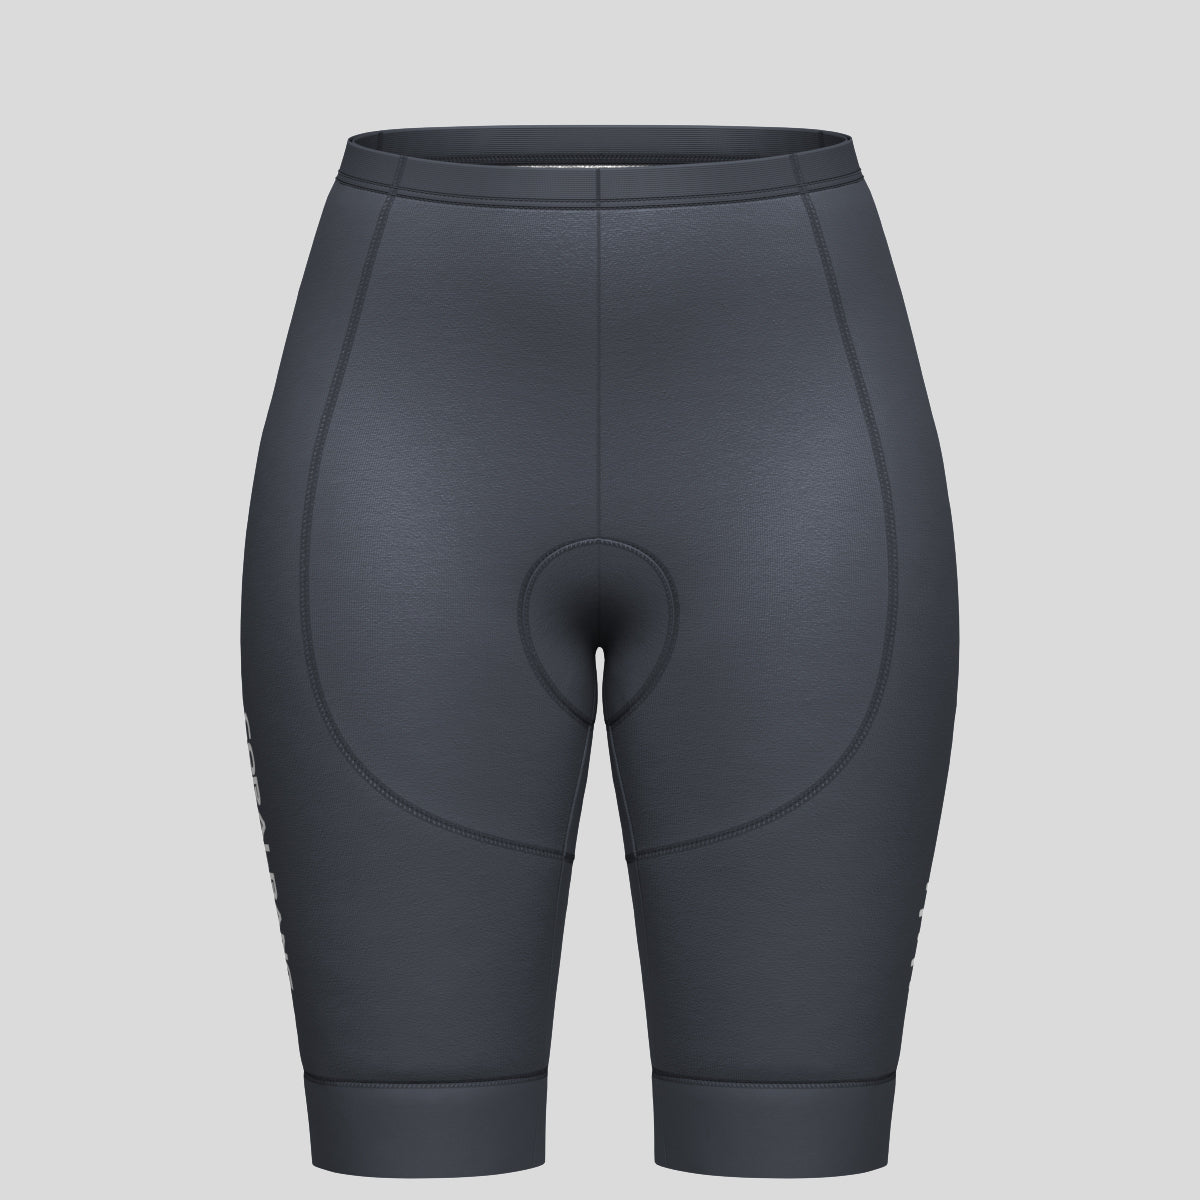 Minimal Solid Women's Cycling Shorts - Graphite